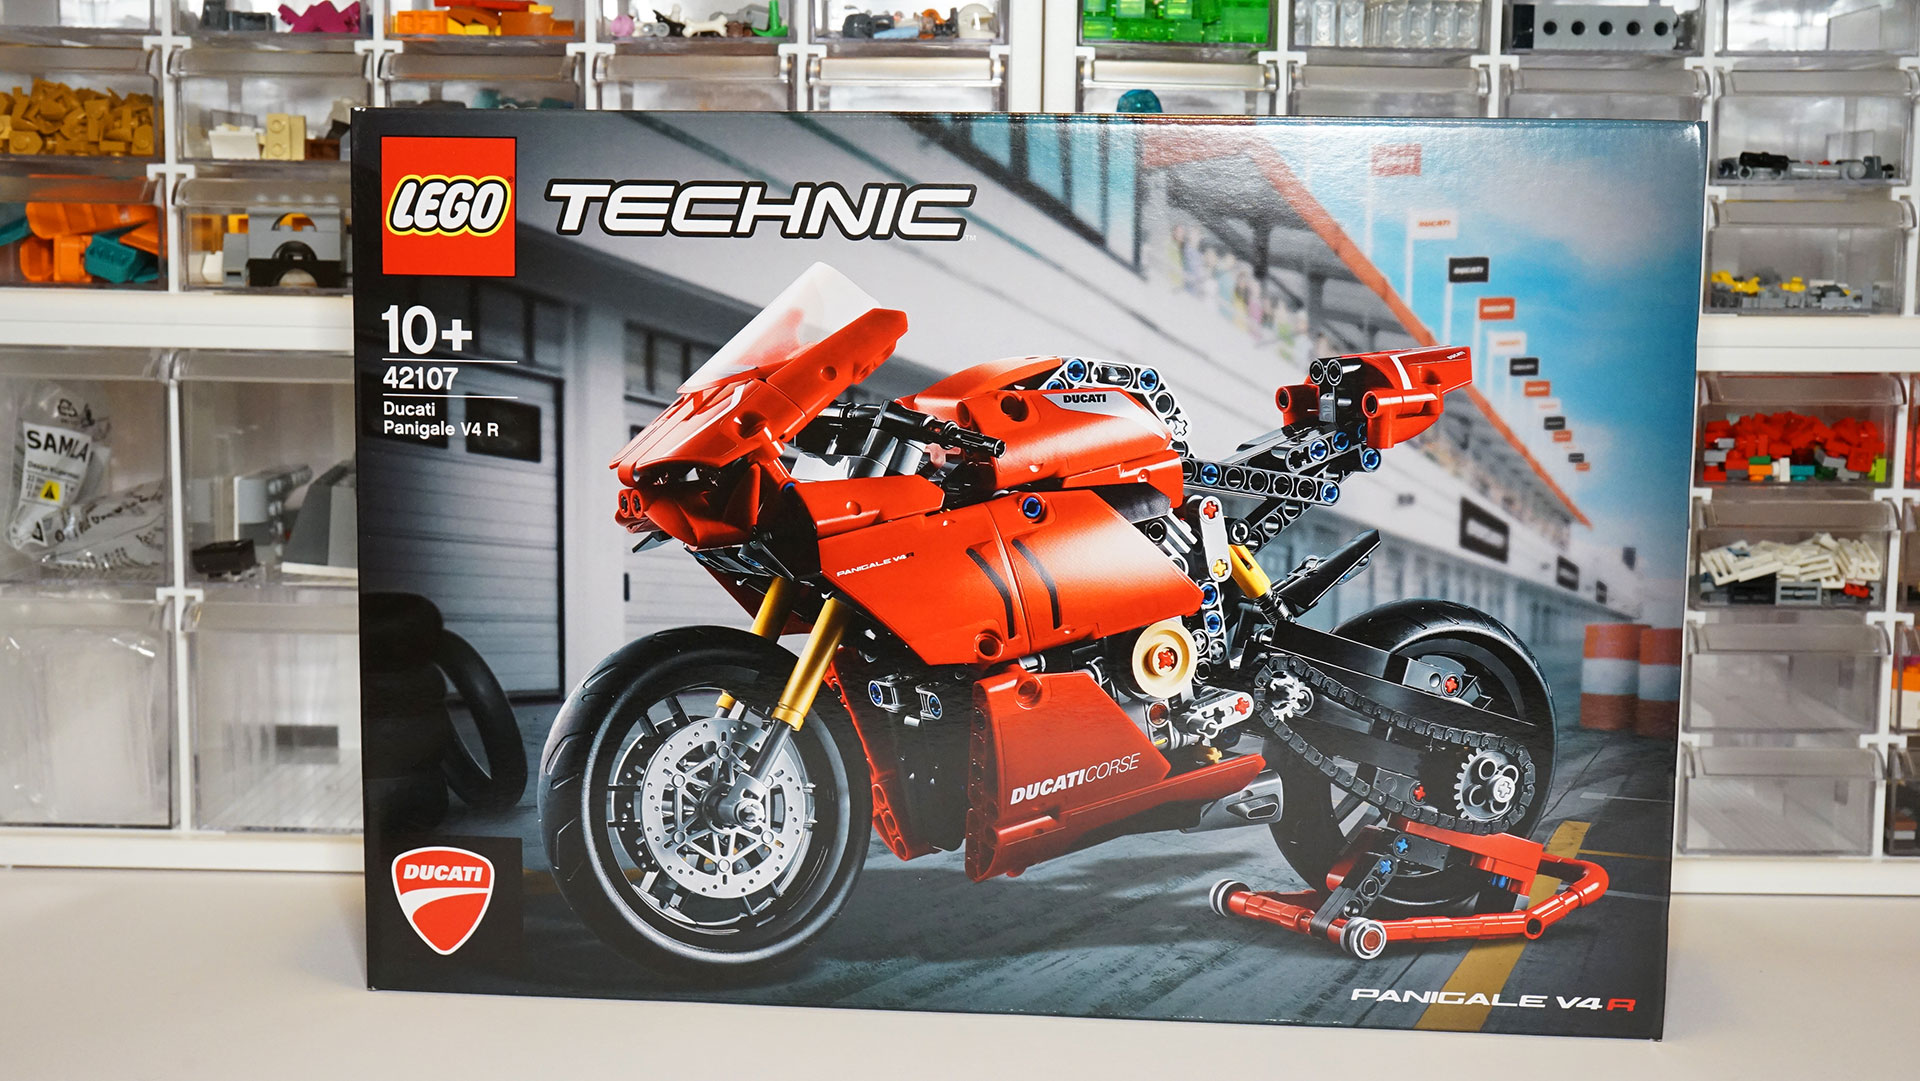 「LEGO開箱」42107 Ducati Panigale V4 R Review 開箱報告| 黃瑪 